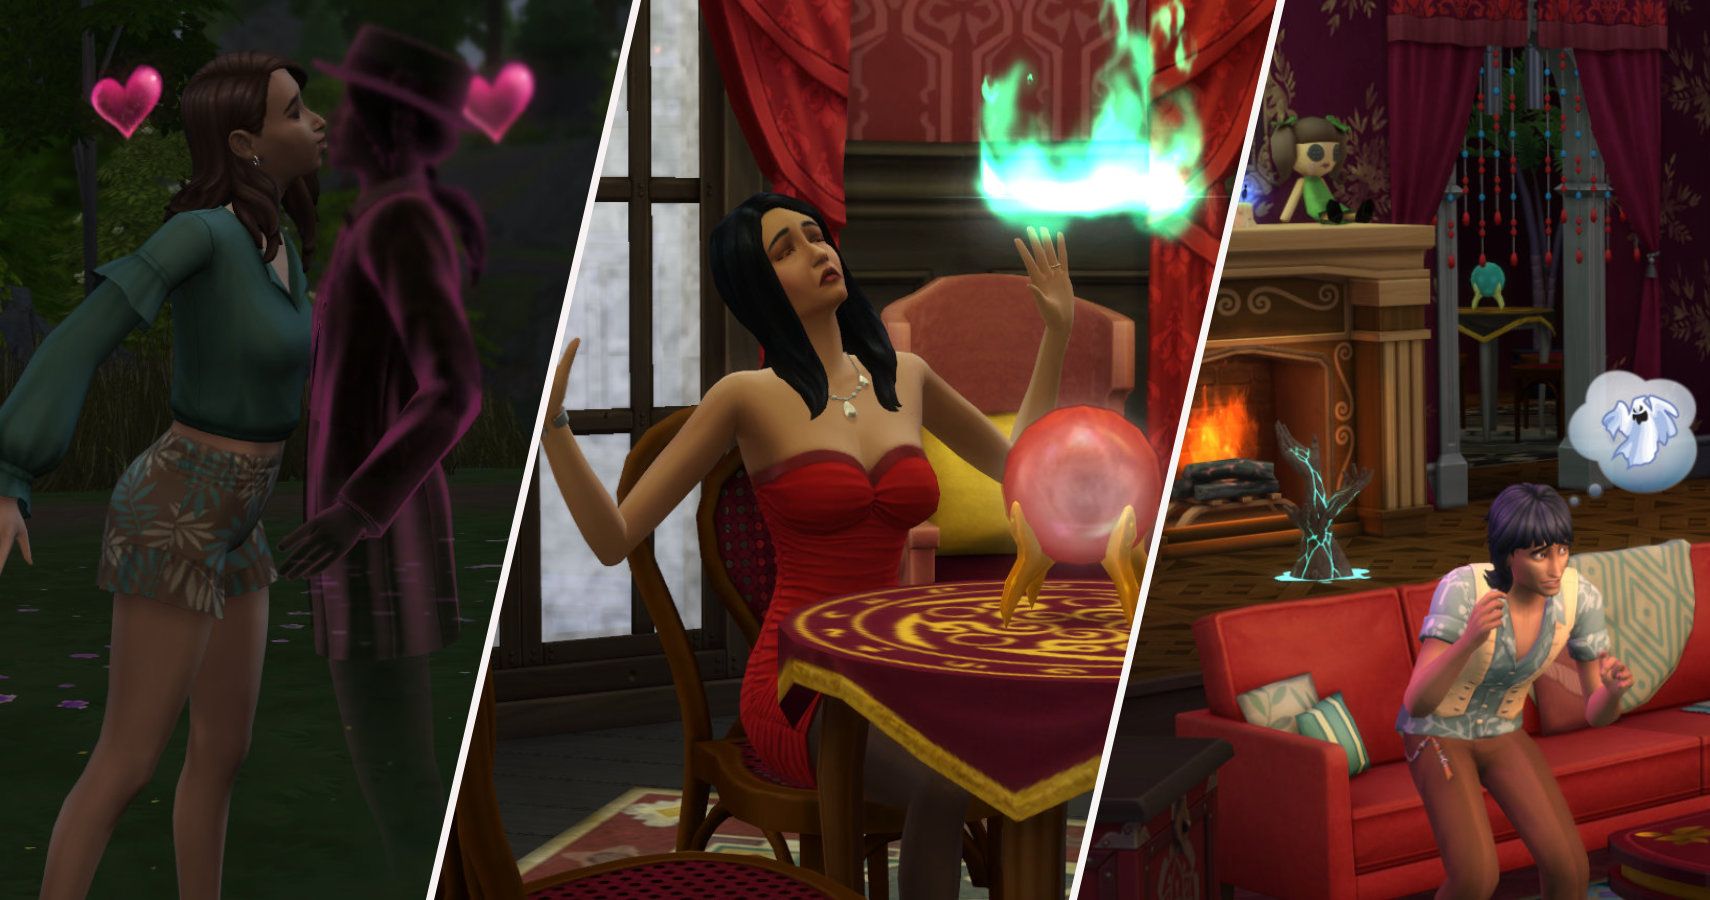 split image. Sim kissing guidry, bella goth using a seance table, sim thinking about ghosts.